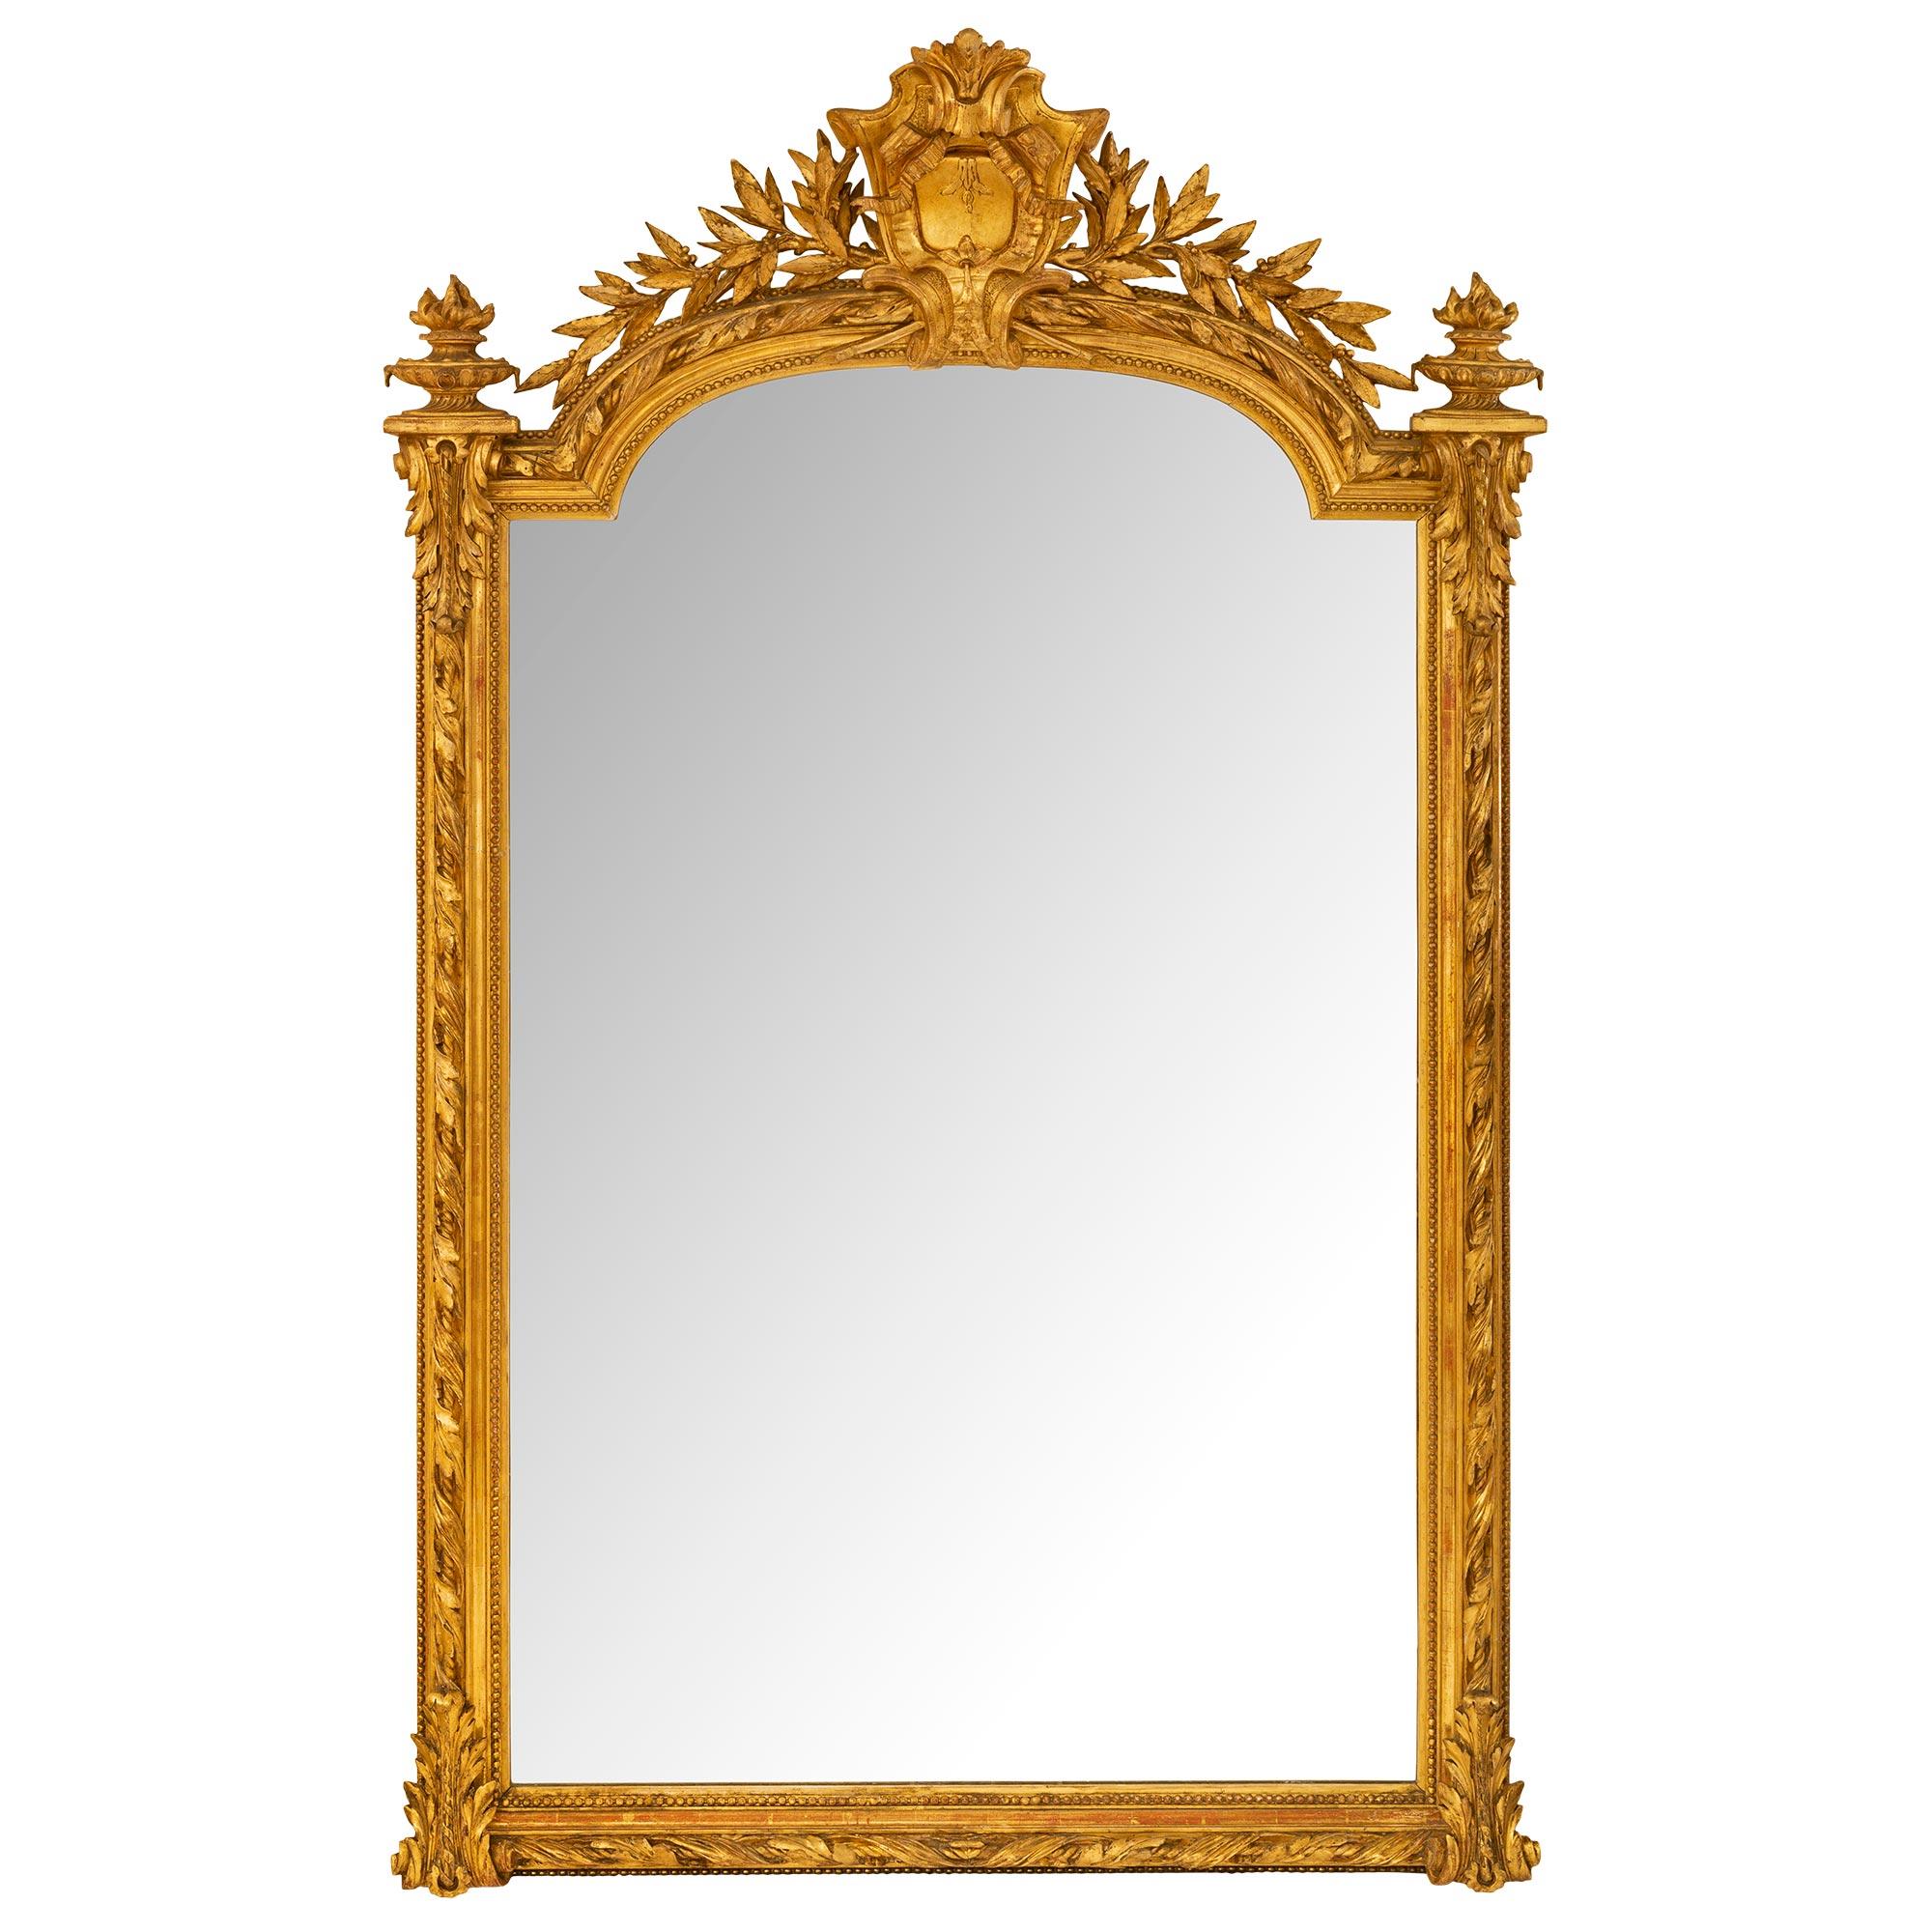 A most elegant French 19th century Louis XVI st. giltwood mirror. The mirror retains its original mirror plate set within a lovely finely carved wrap around beaded mottled border. A charming richly carved twisted foliate band extends throughout the